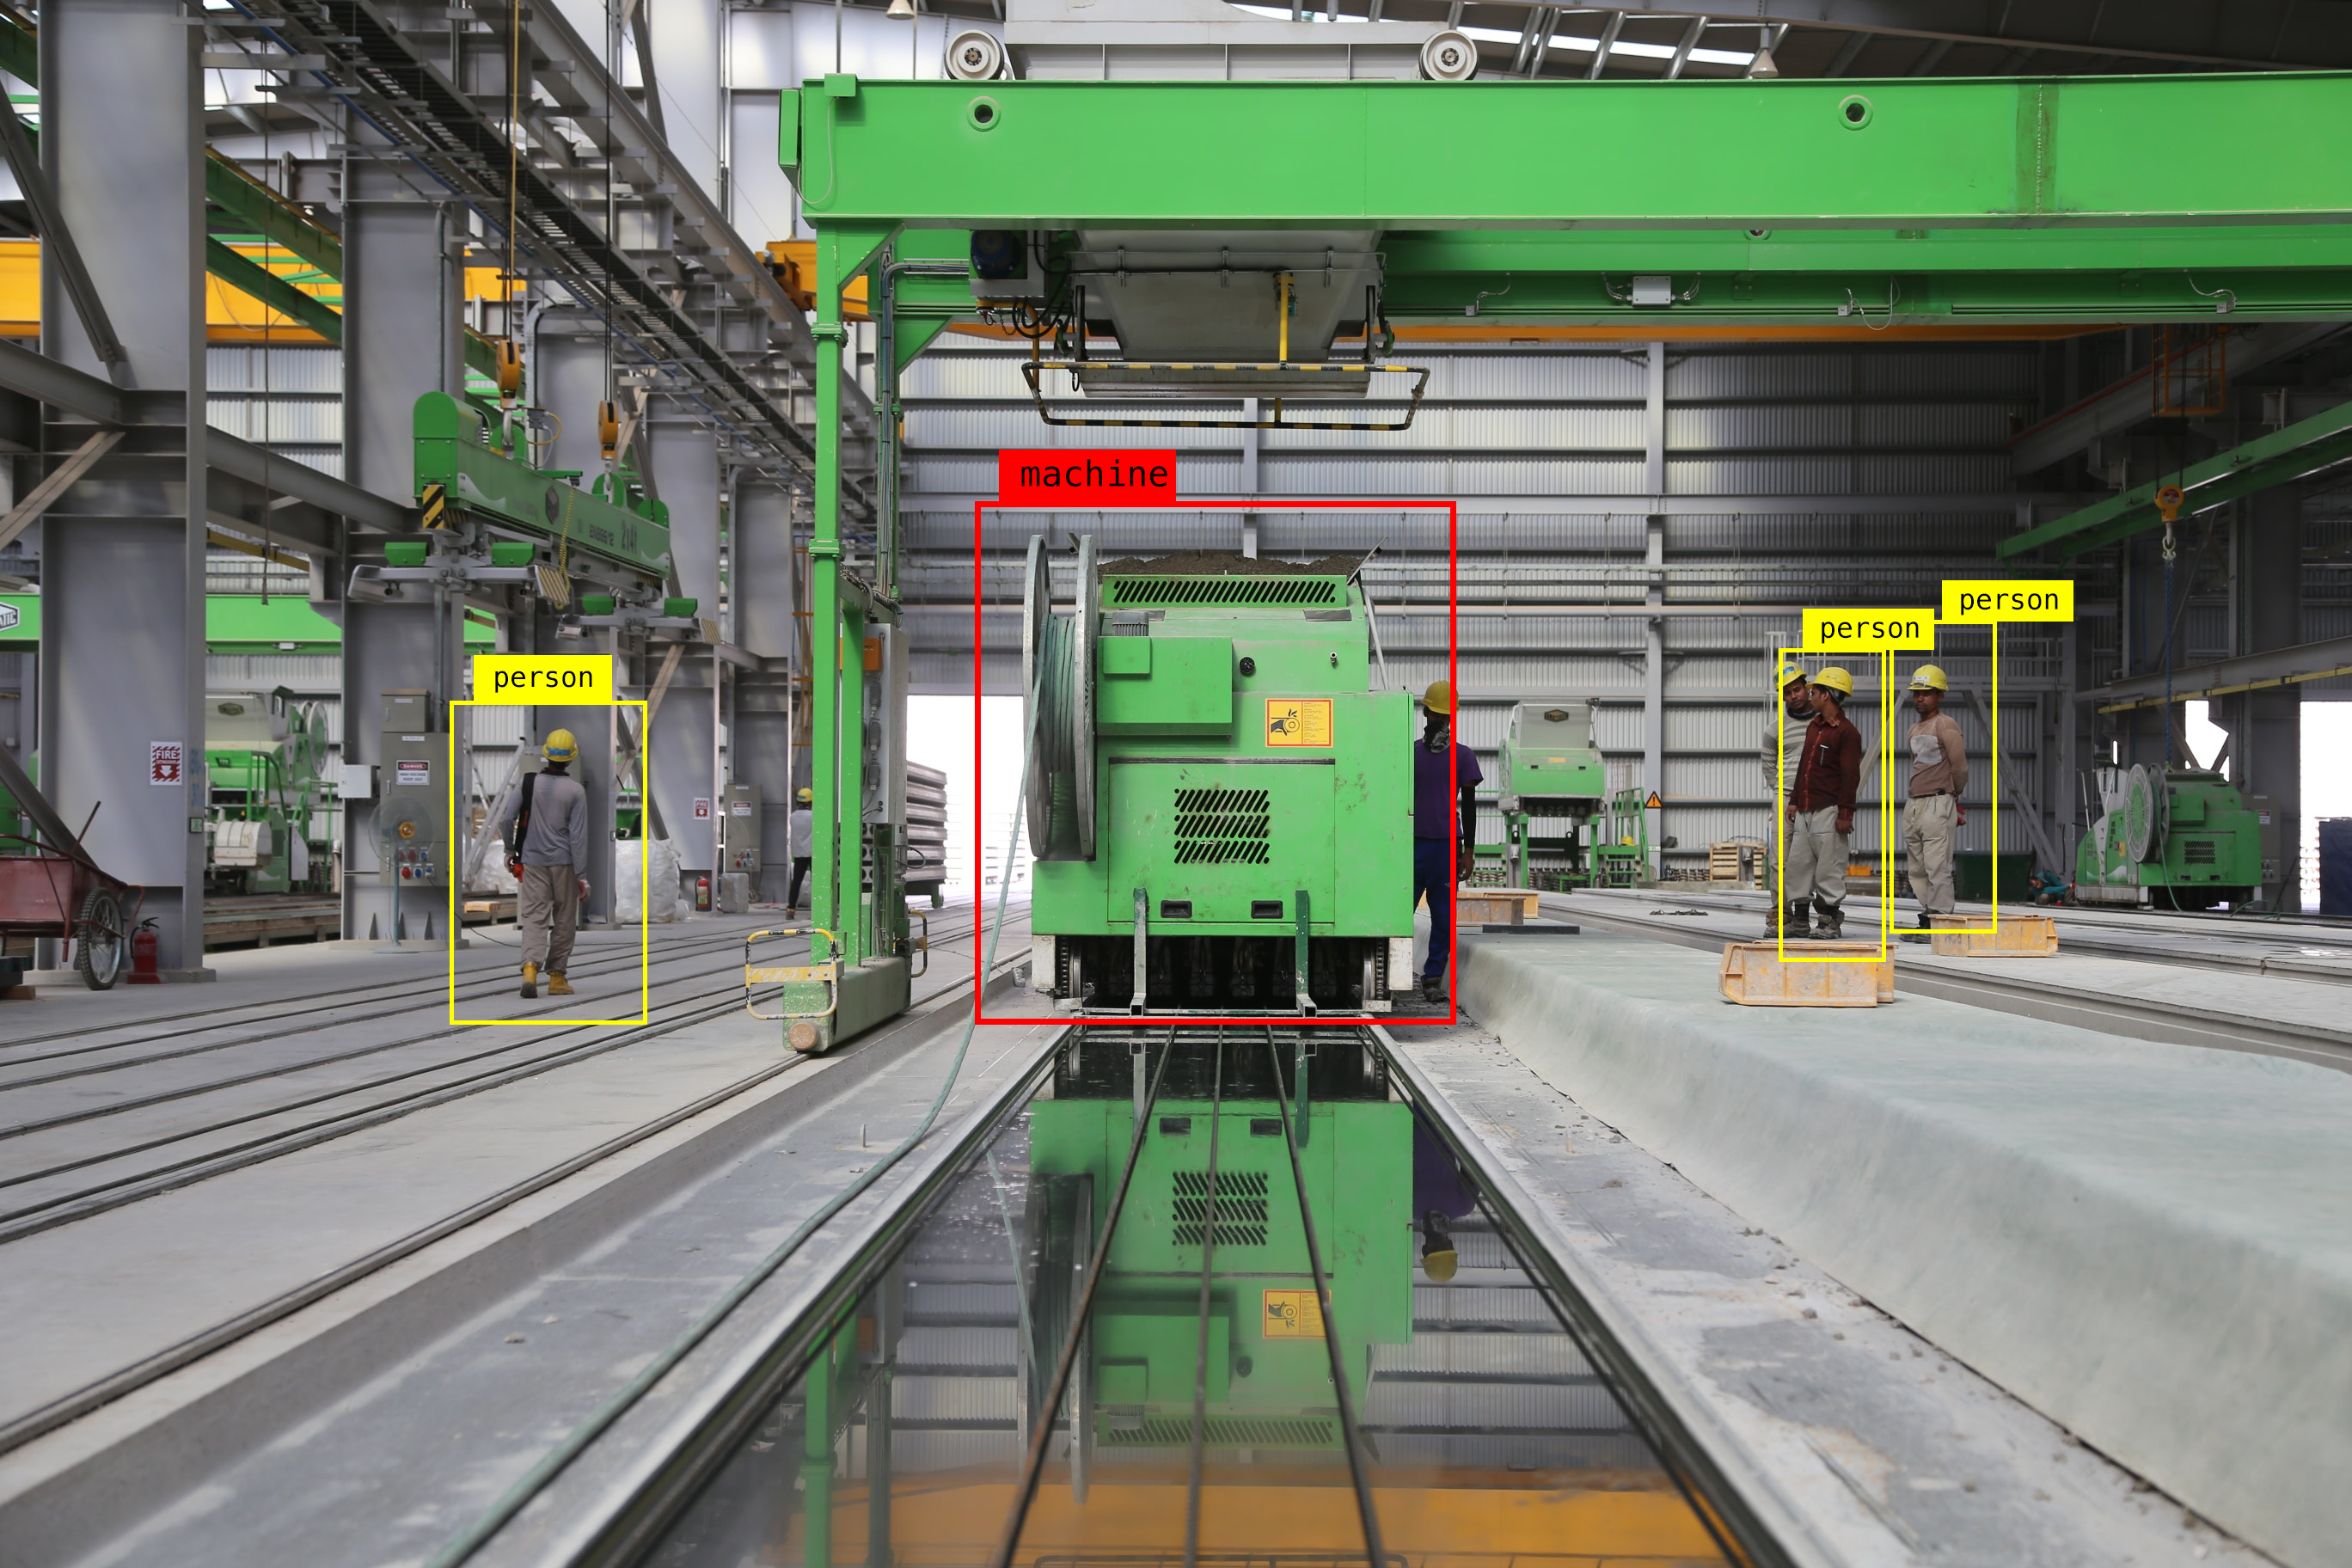 Industrial computer-vision and object detection